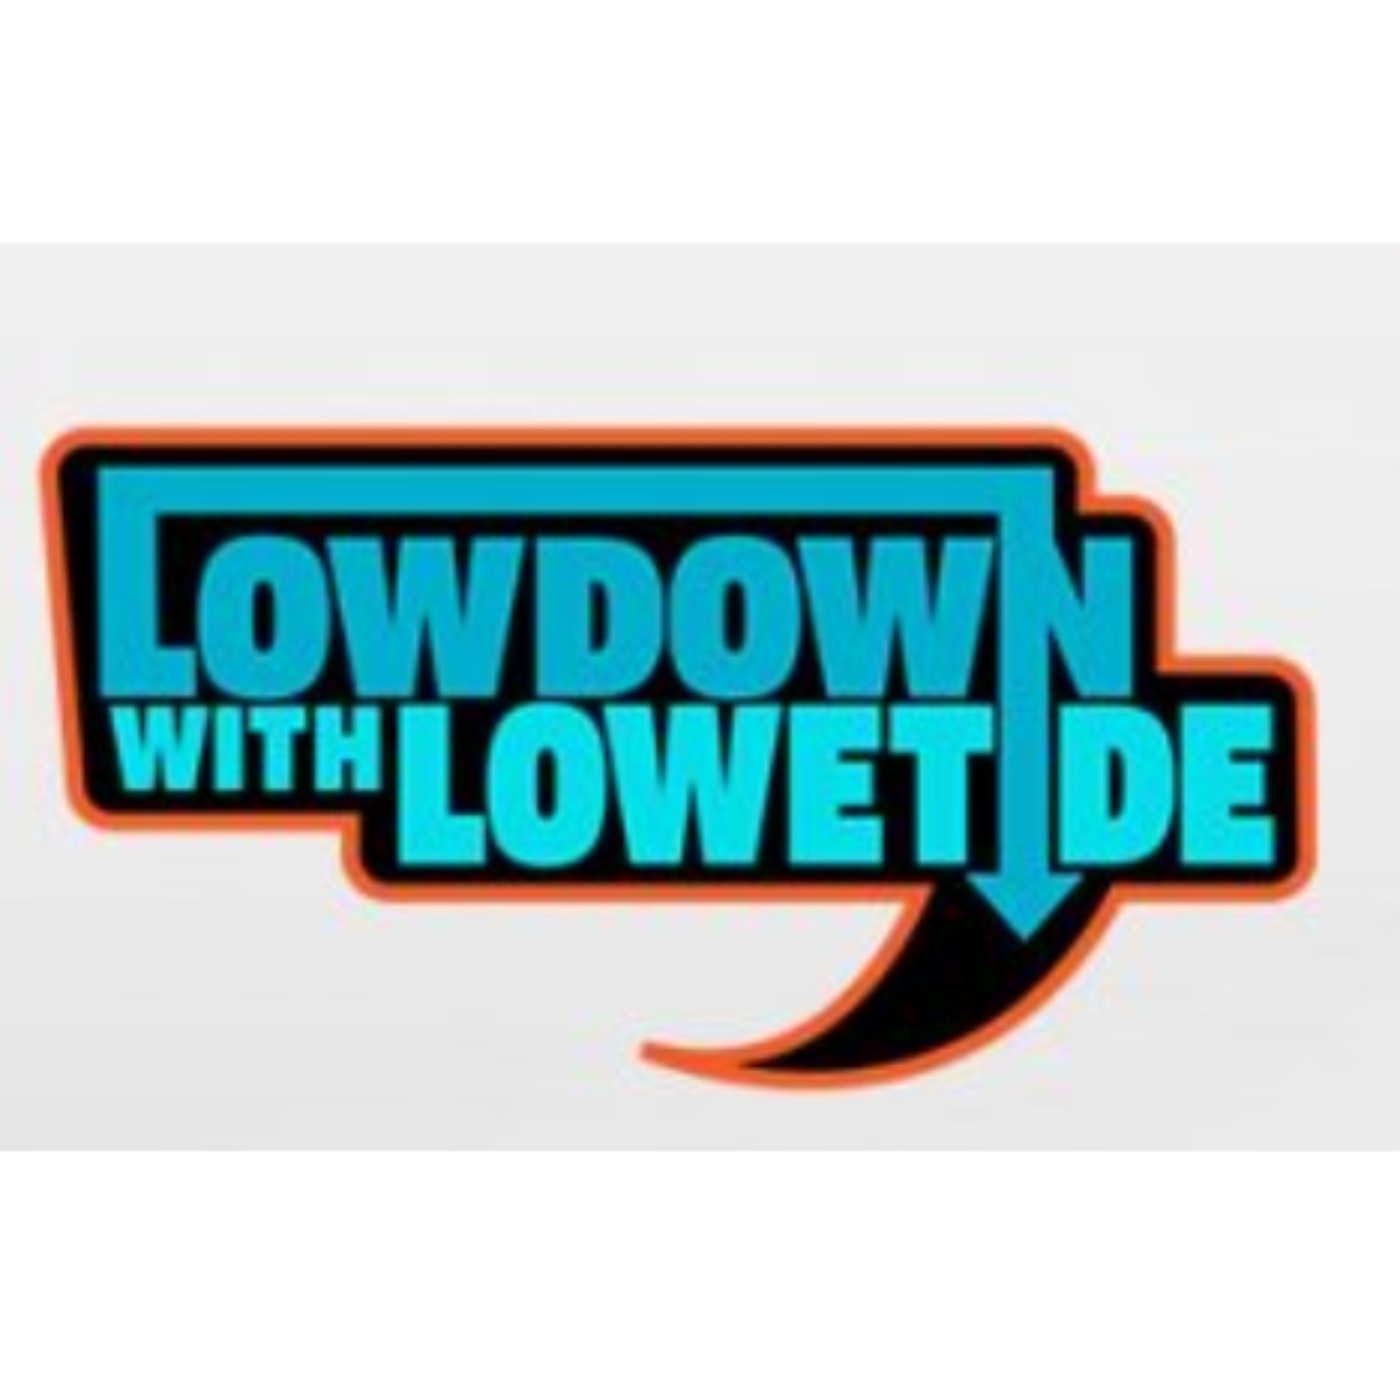 The Lowdown with Lowetide - June 25 - Hour 2